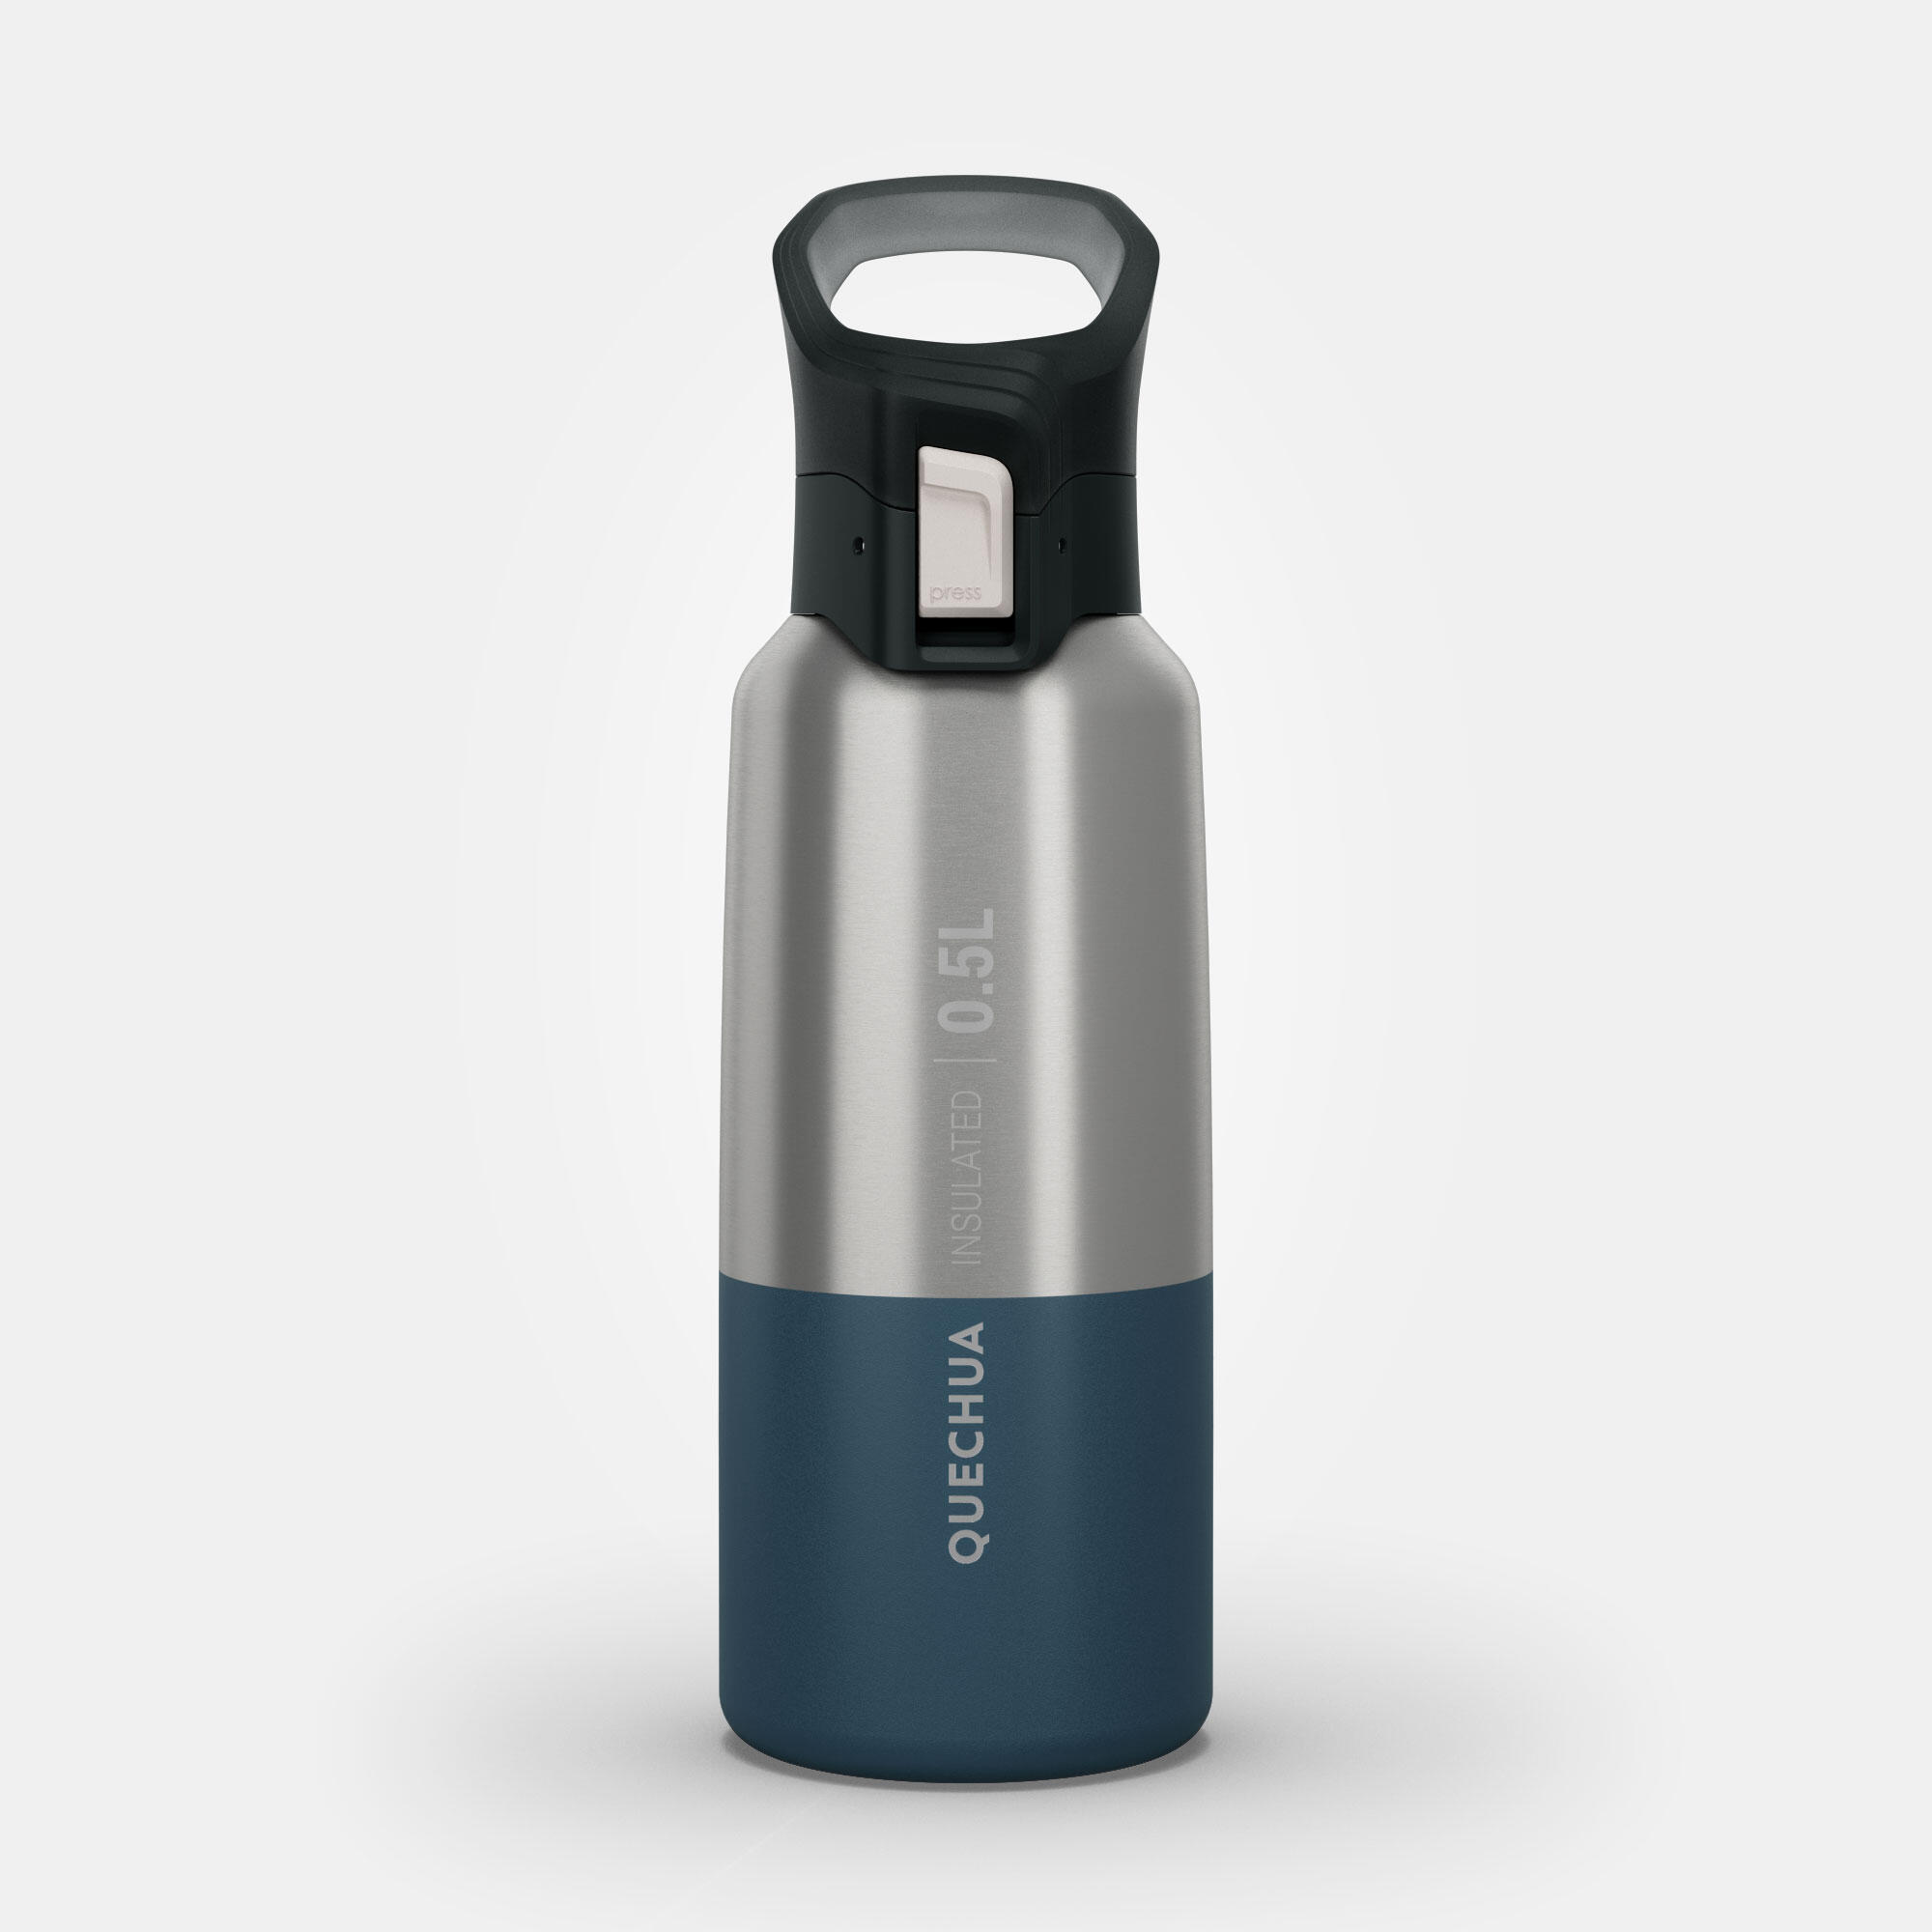 MH500 isolthermal flask 0.5 L - QUECHUA